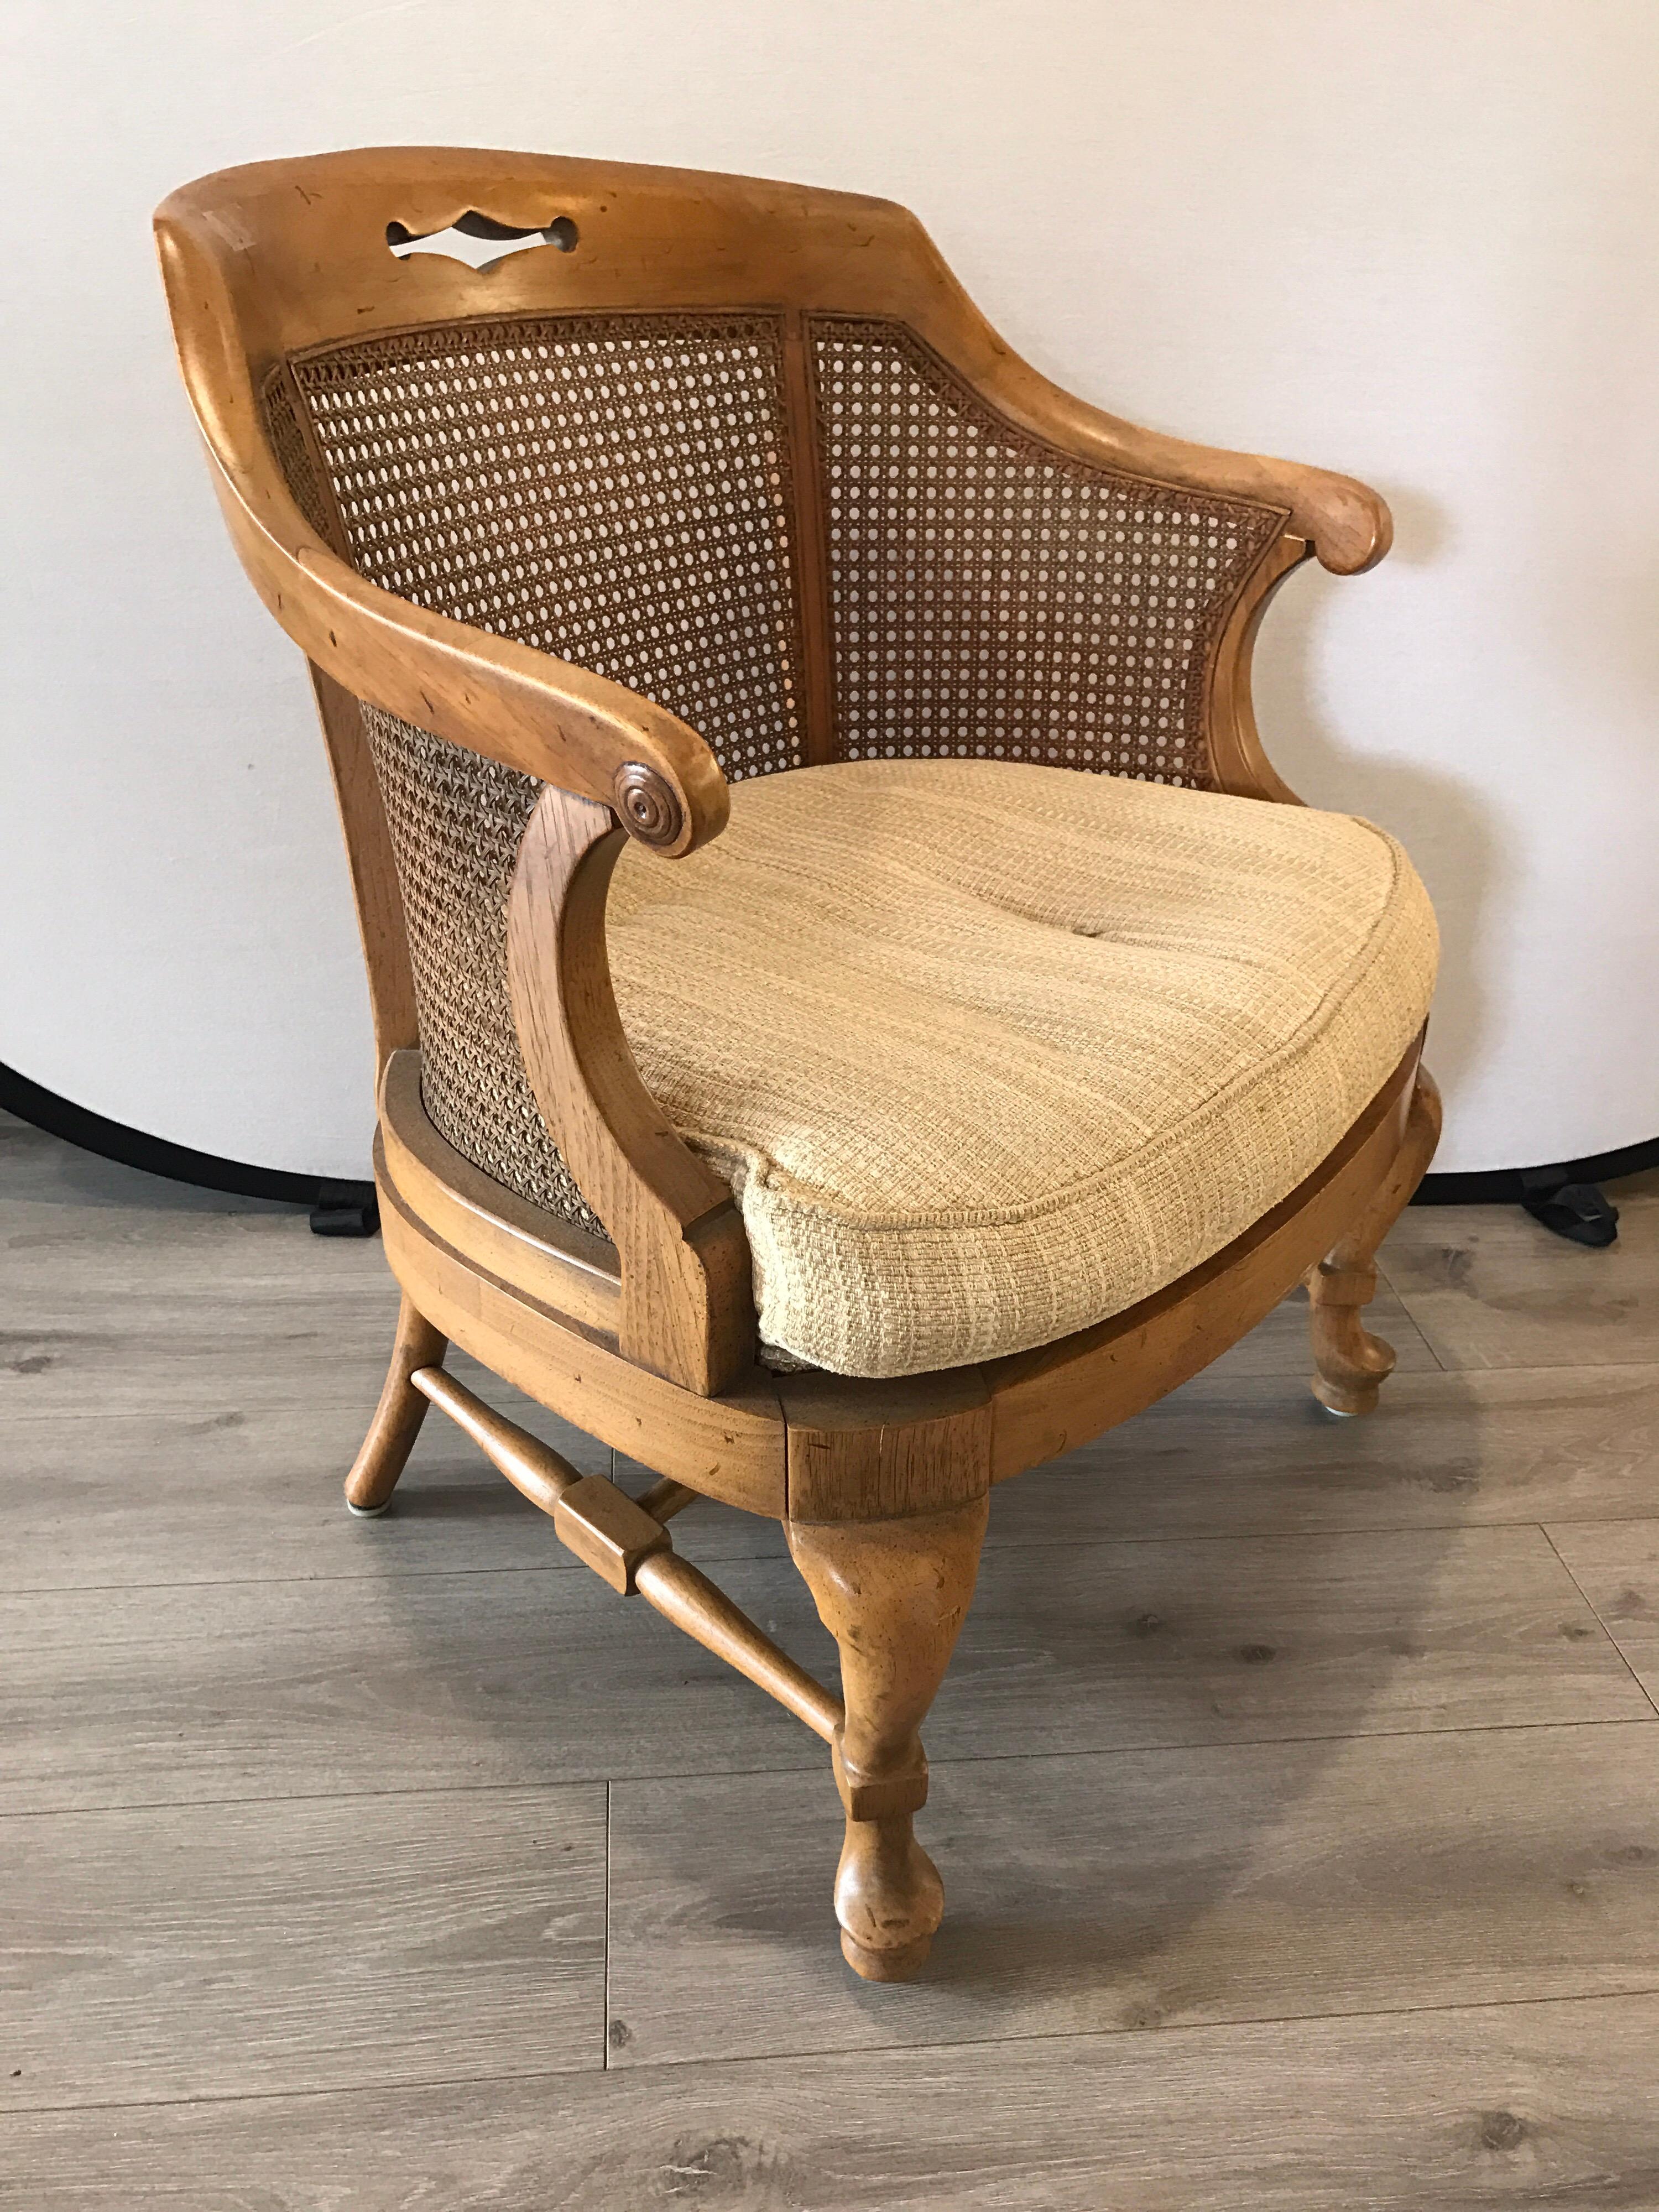 Barrel back caned chair in beautiful condition from France, circa 1960s.